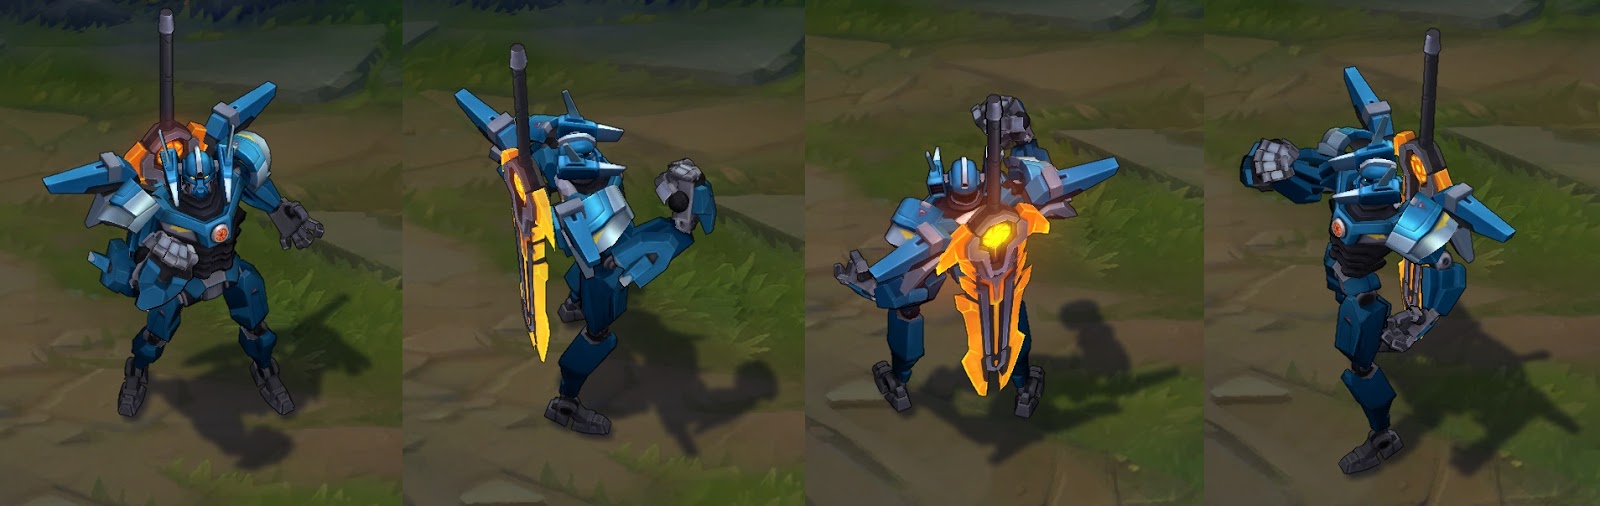 mecha aatrox skin for league of legends ingame picture